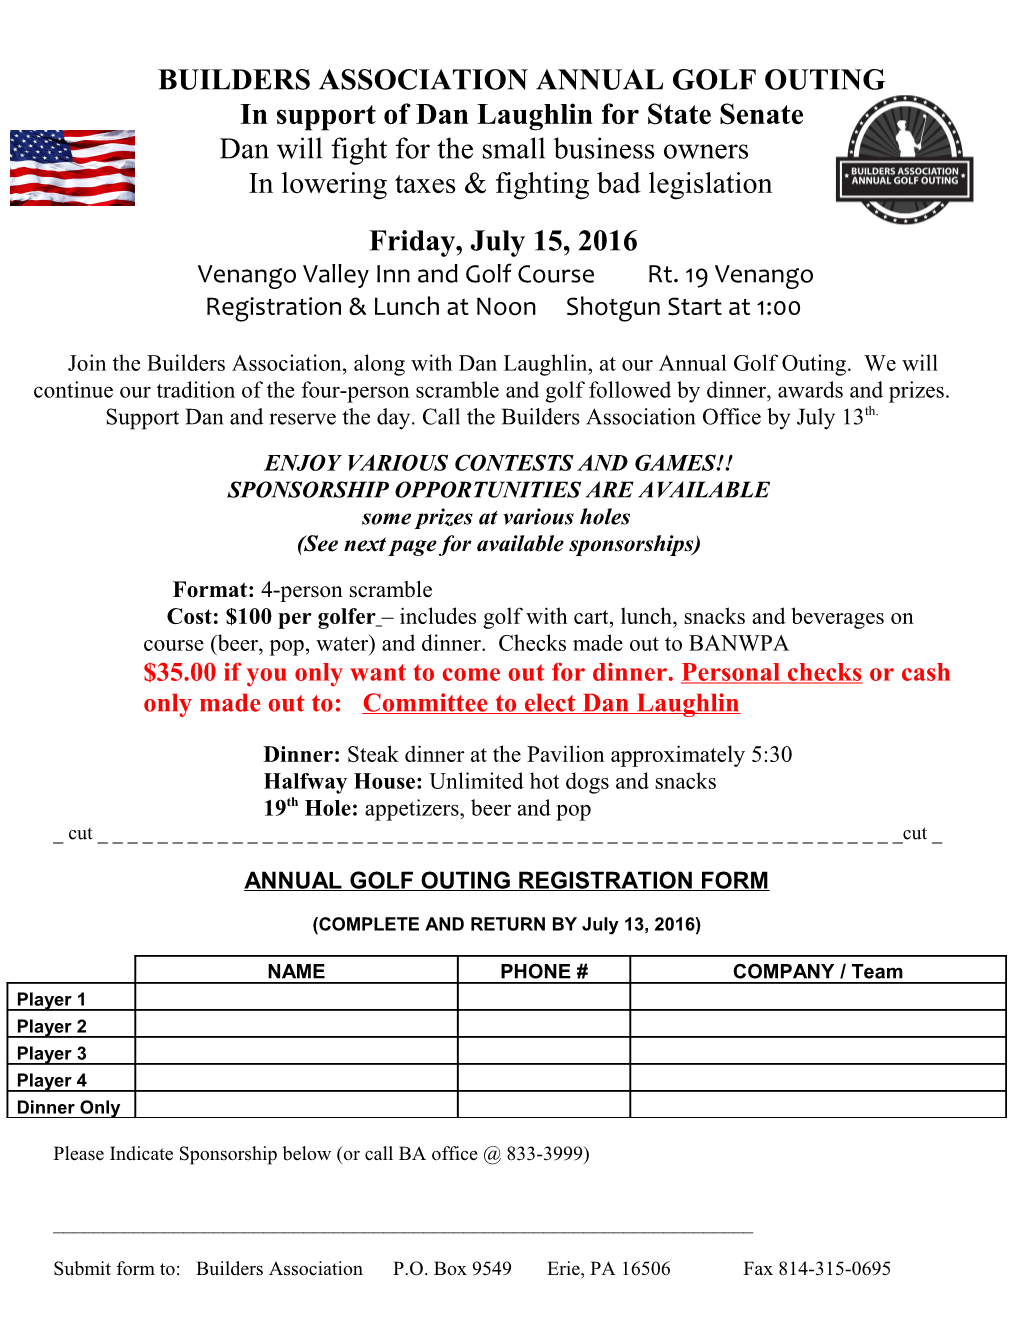 Builders Association Annual Golf Outing